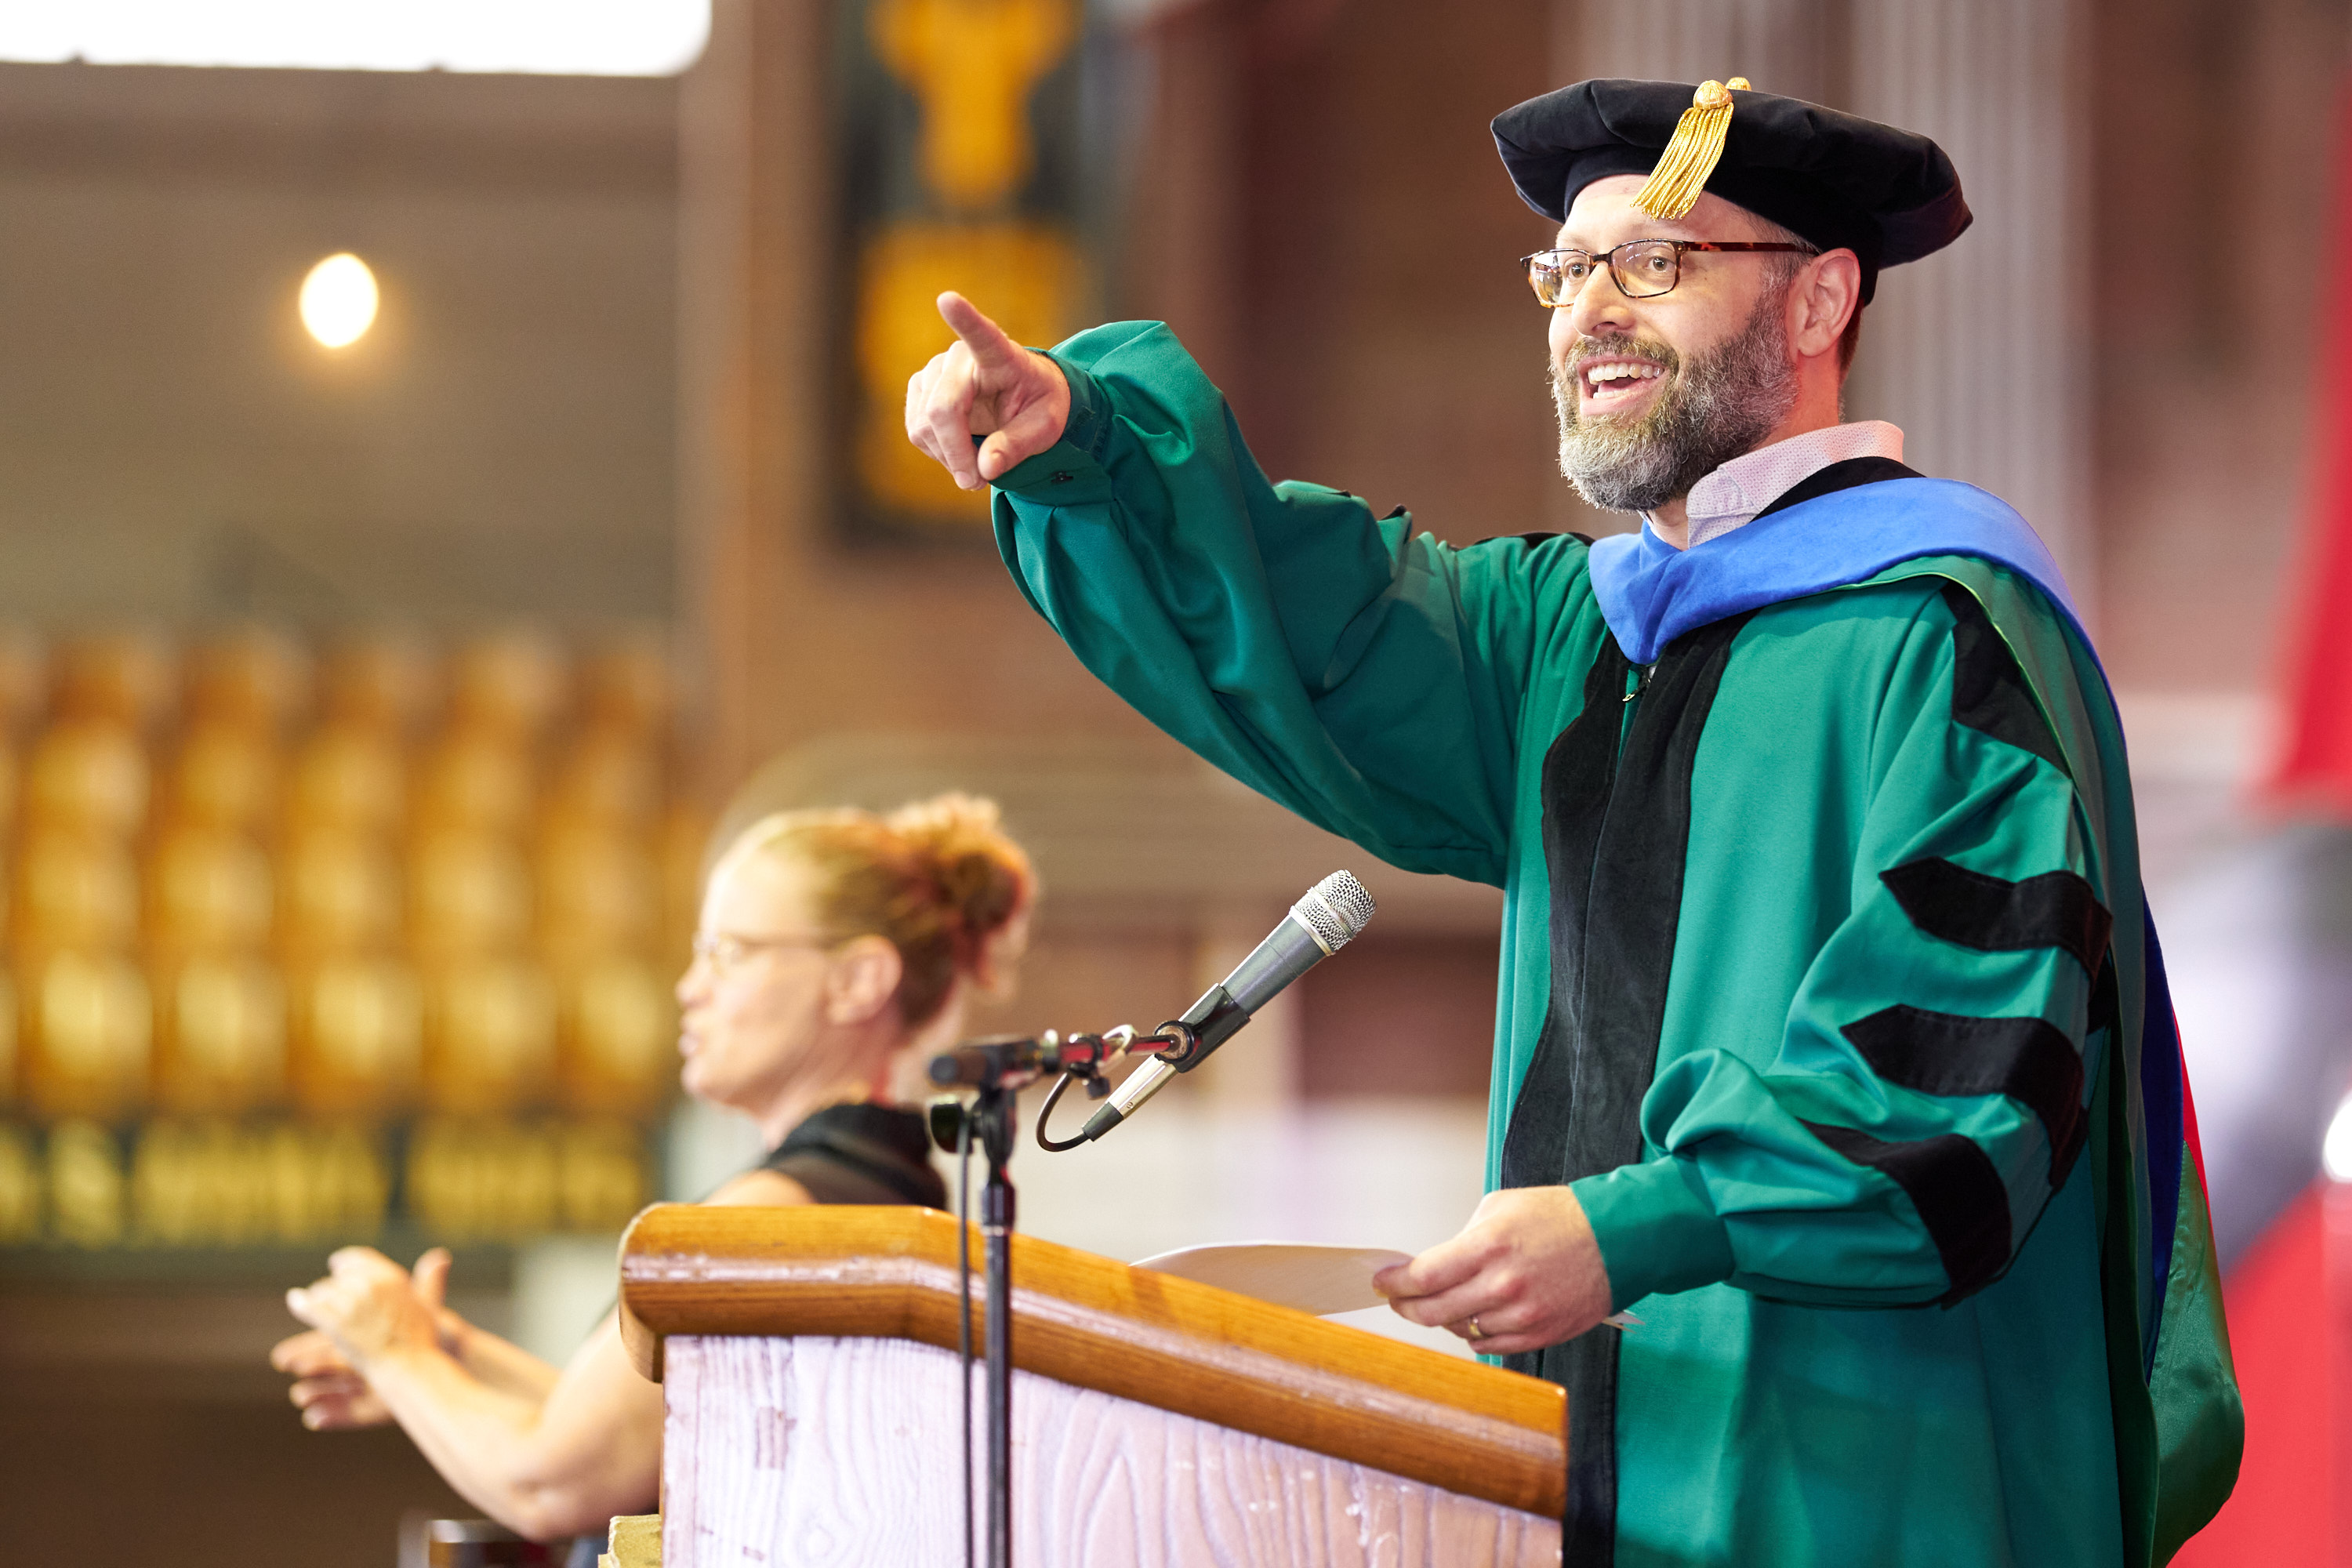 Kyle Harms, lecturer of information science, was chosen by graduates to give the keynote address at the department graduation recognition on May 27, 2022 in Barton Hall.